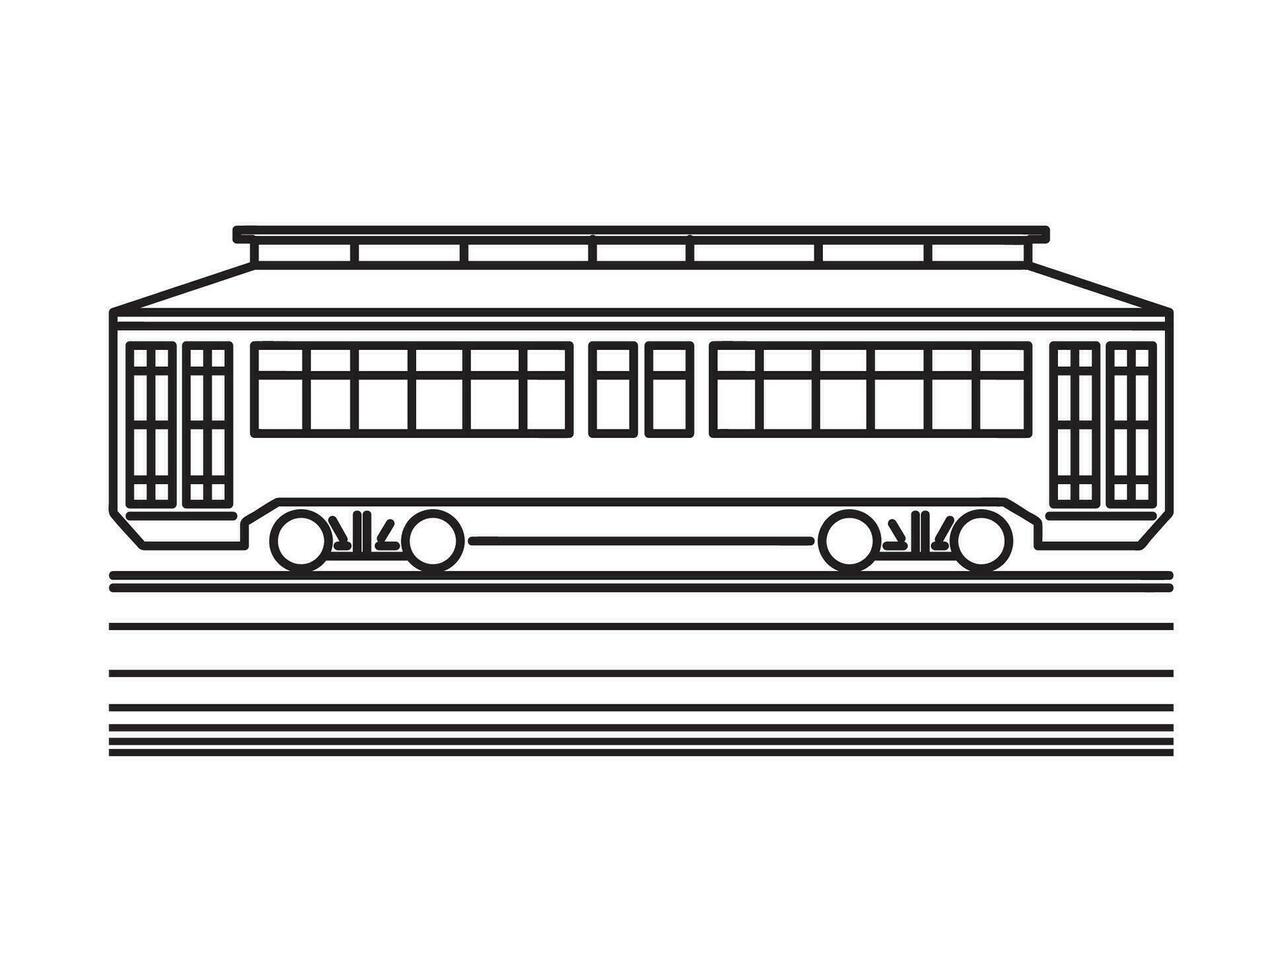 Streetcar or Trolley Car Side View Mono Line Art vector